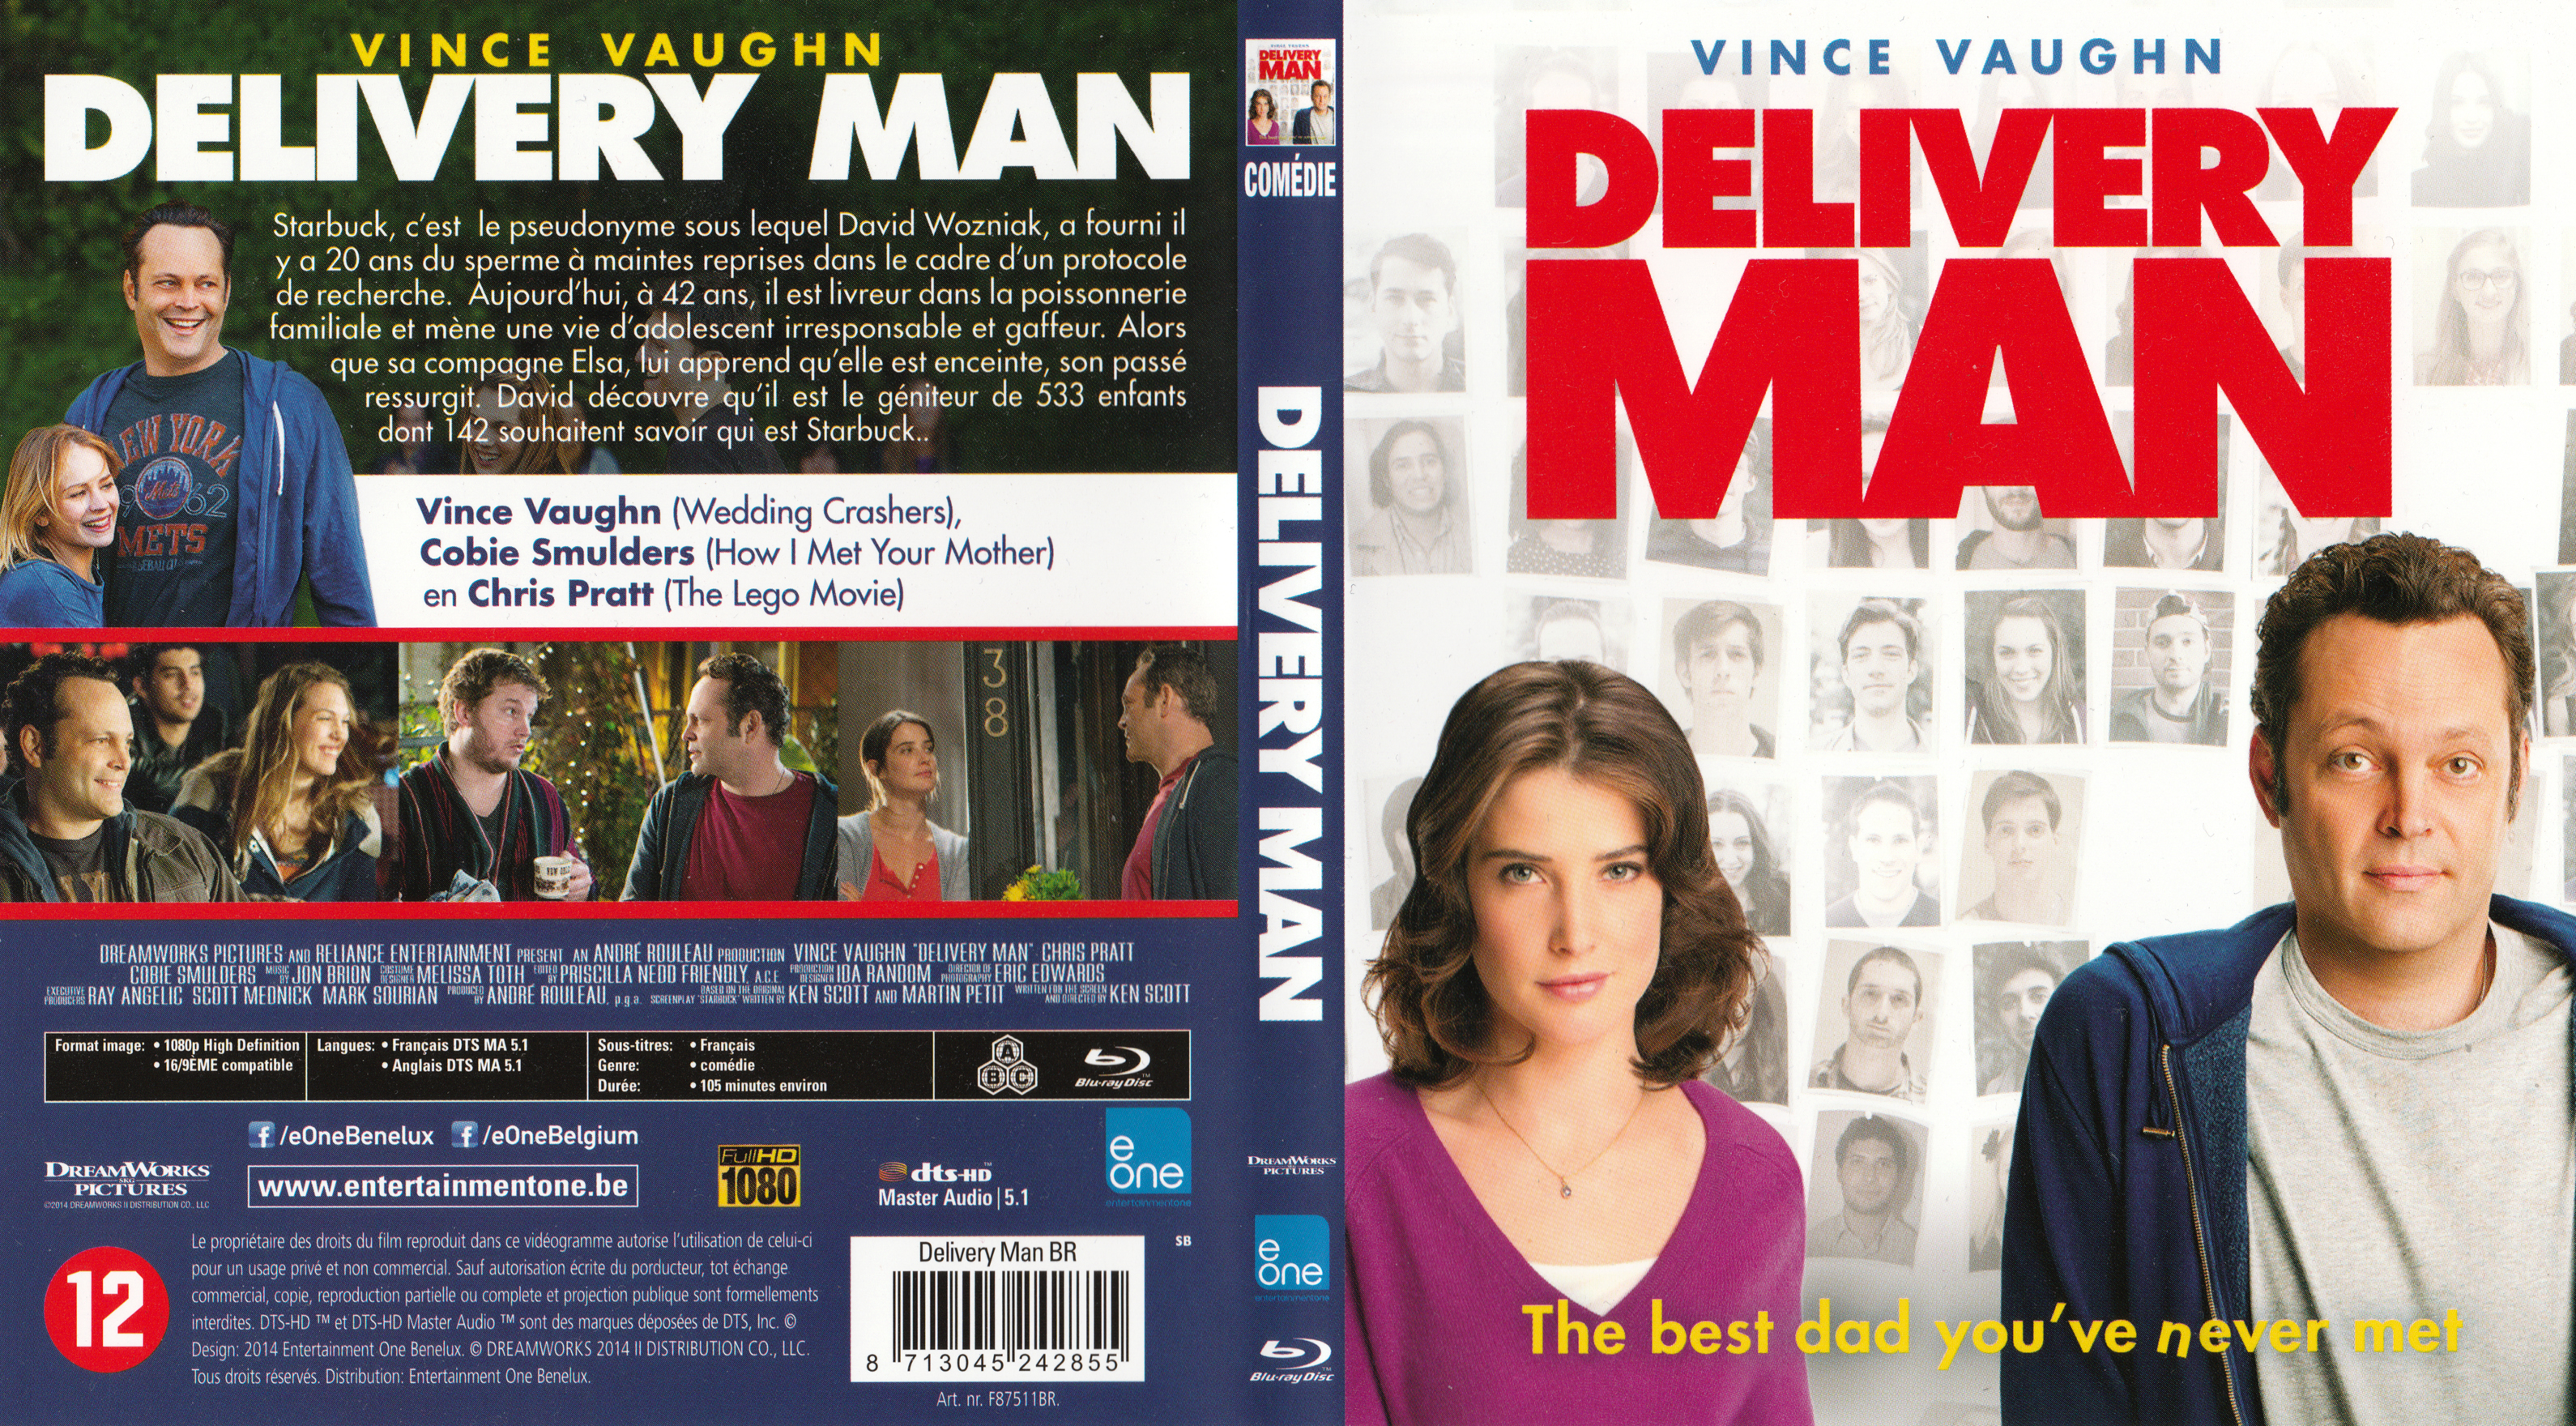 Jaquette DVD Delivery man (BLU-RAY)